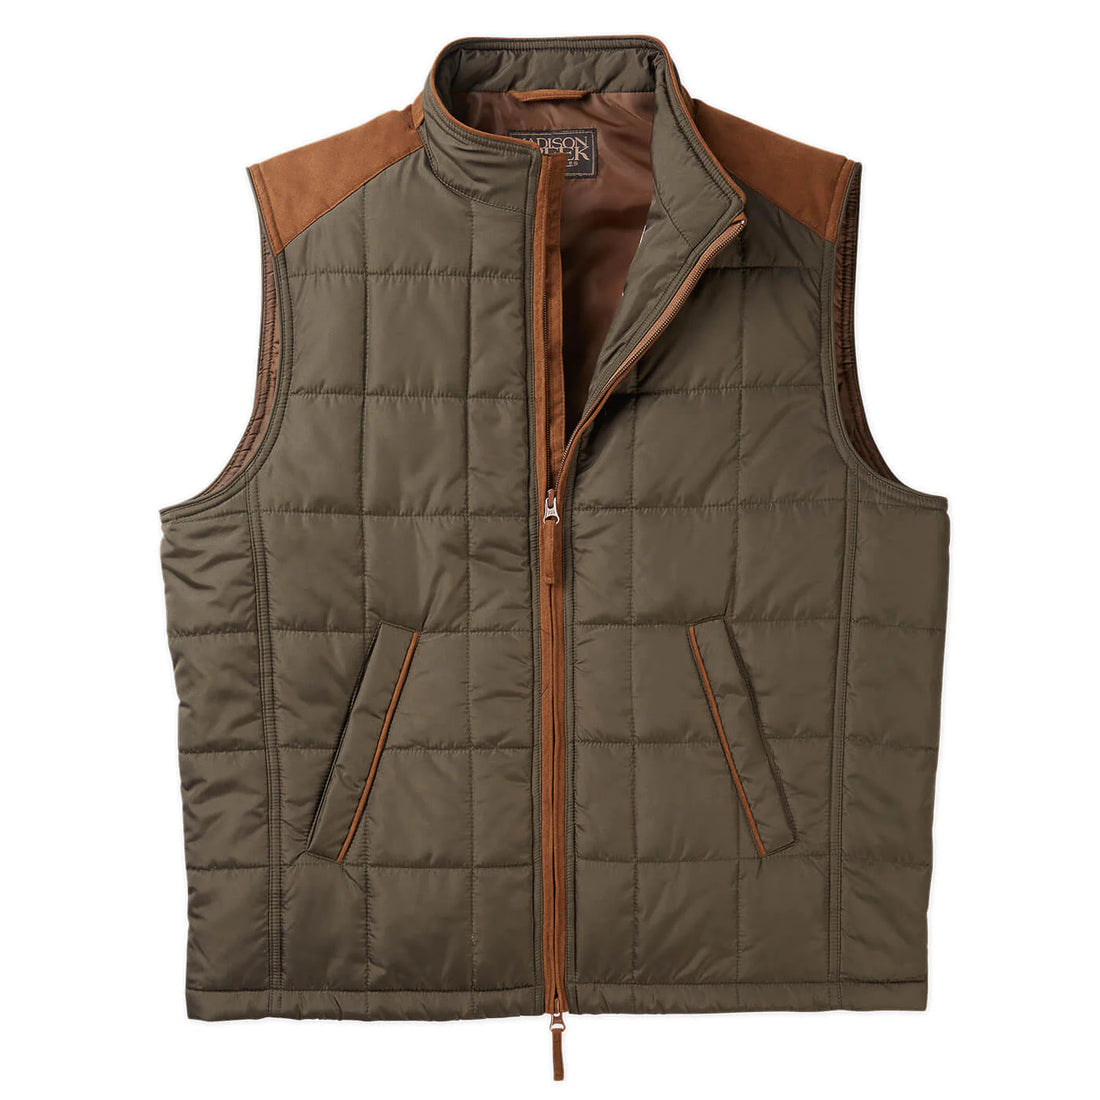 Madison Creek Shelby Lightweight Nylon Quilted Vest